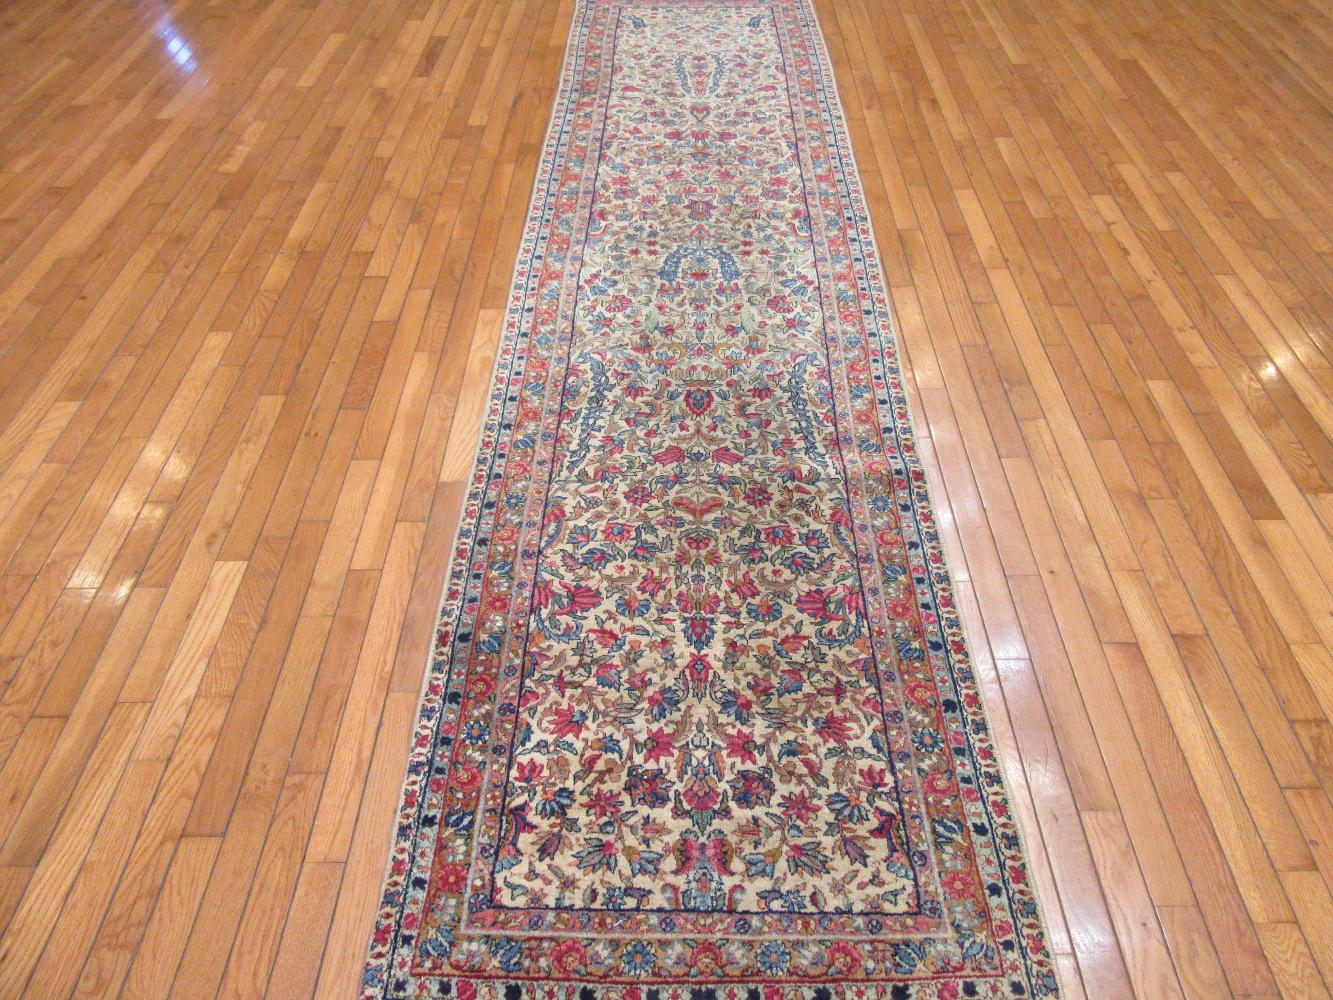 This is an antique hand knotted Persian Kerman runner rug. It has a traditional small scale floral pattern in primary colors on an ivory color background. The rug is made with wool on a cotton foundation. It measures 2' 10'' x 11' 5''.